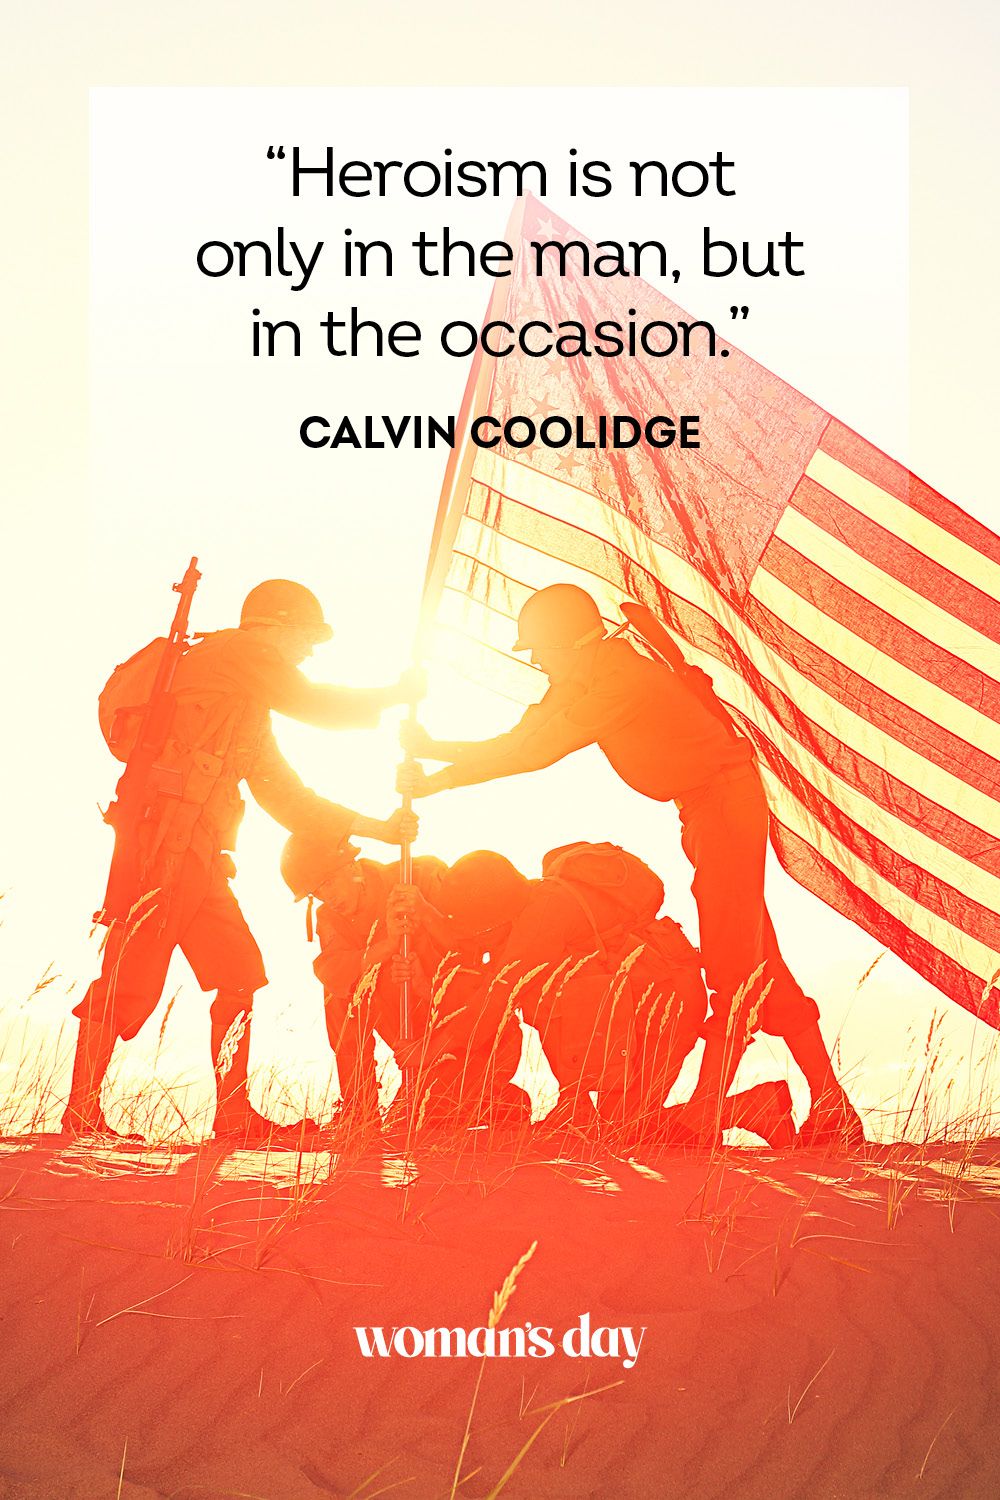 25 Memorial Day Quotes and Instagram Captions to Honor Fallen Heroes